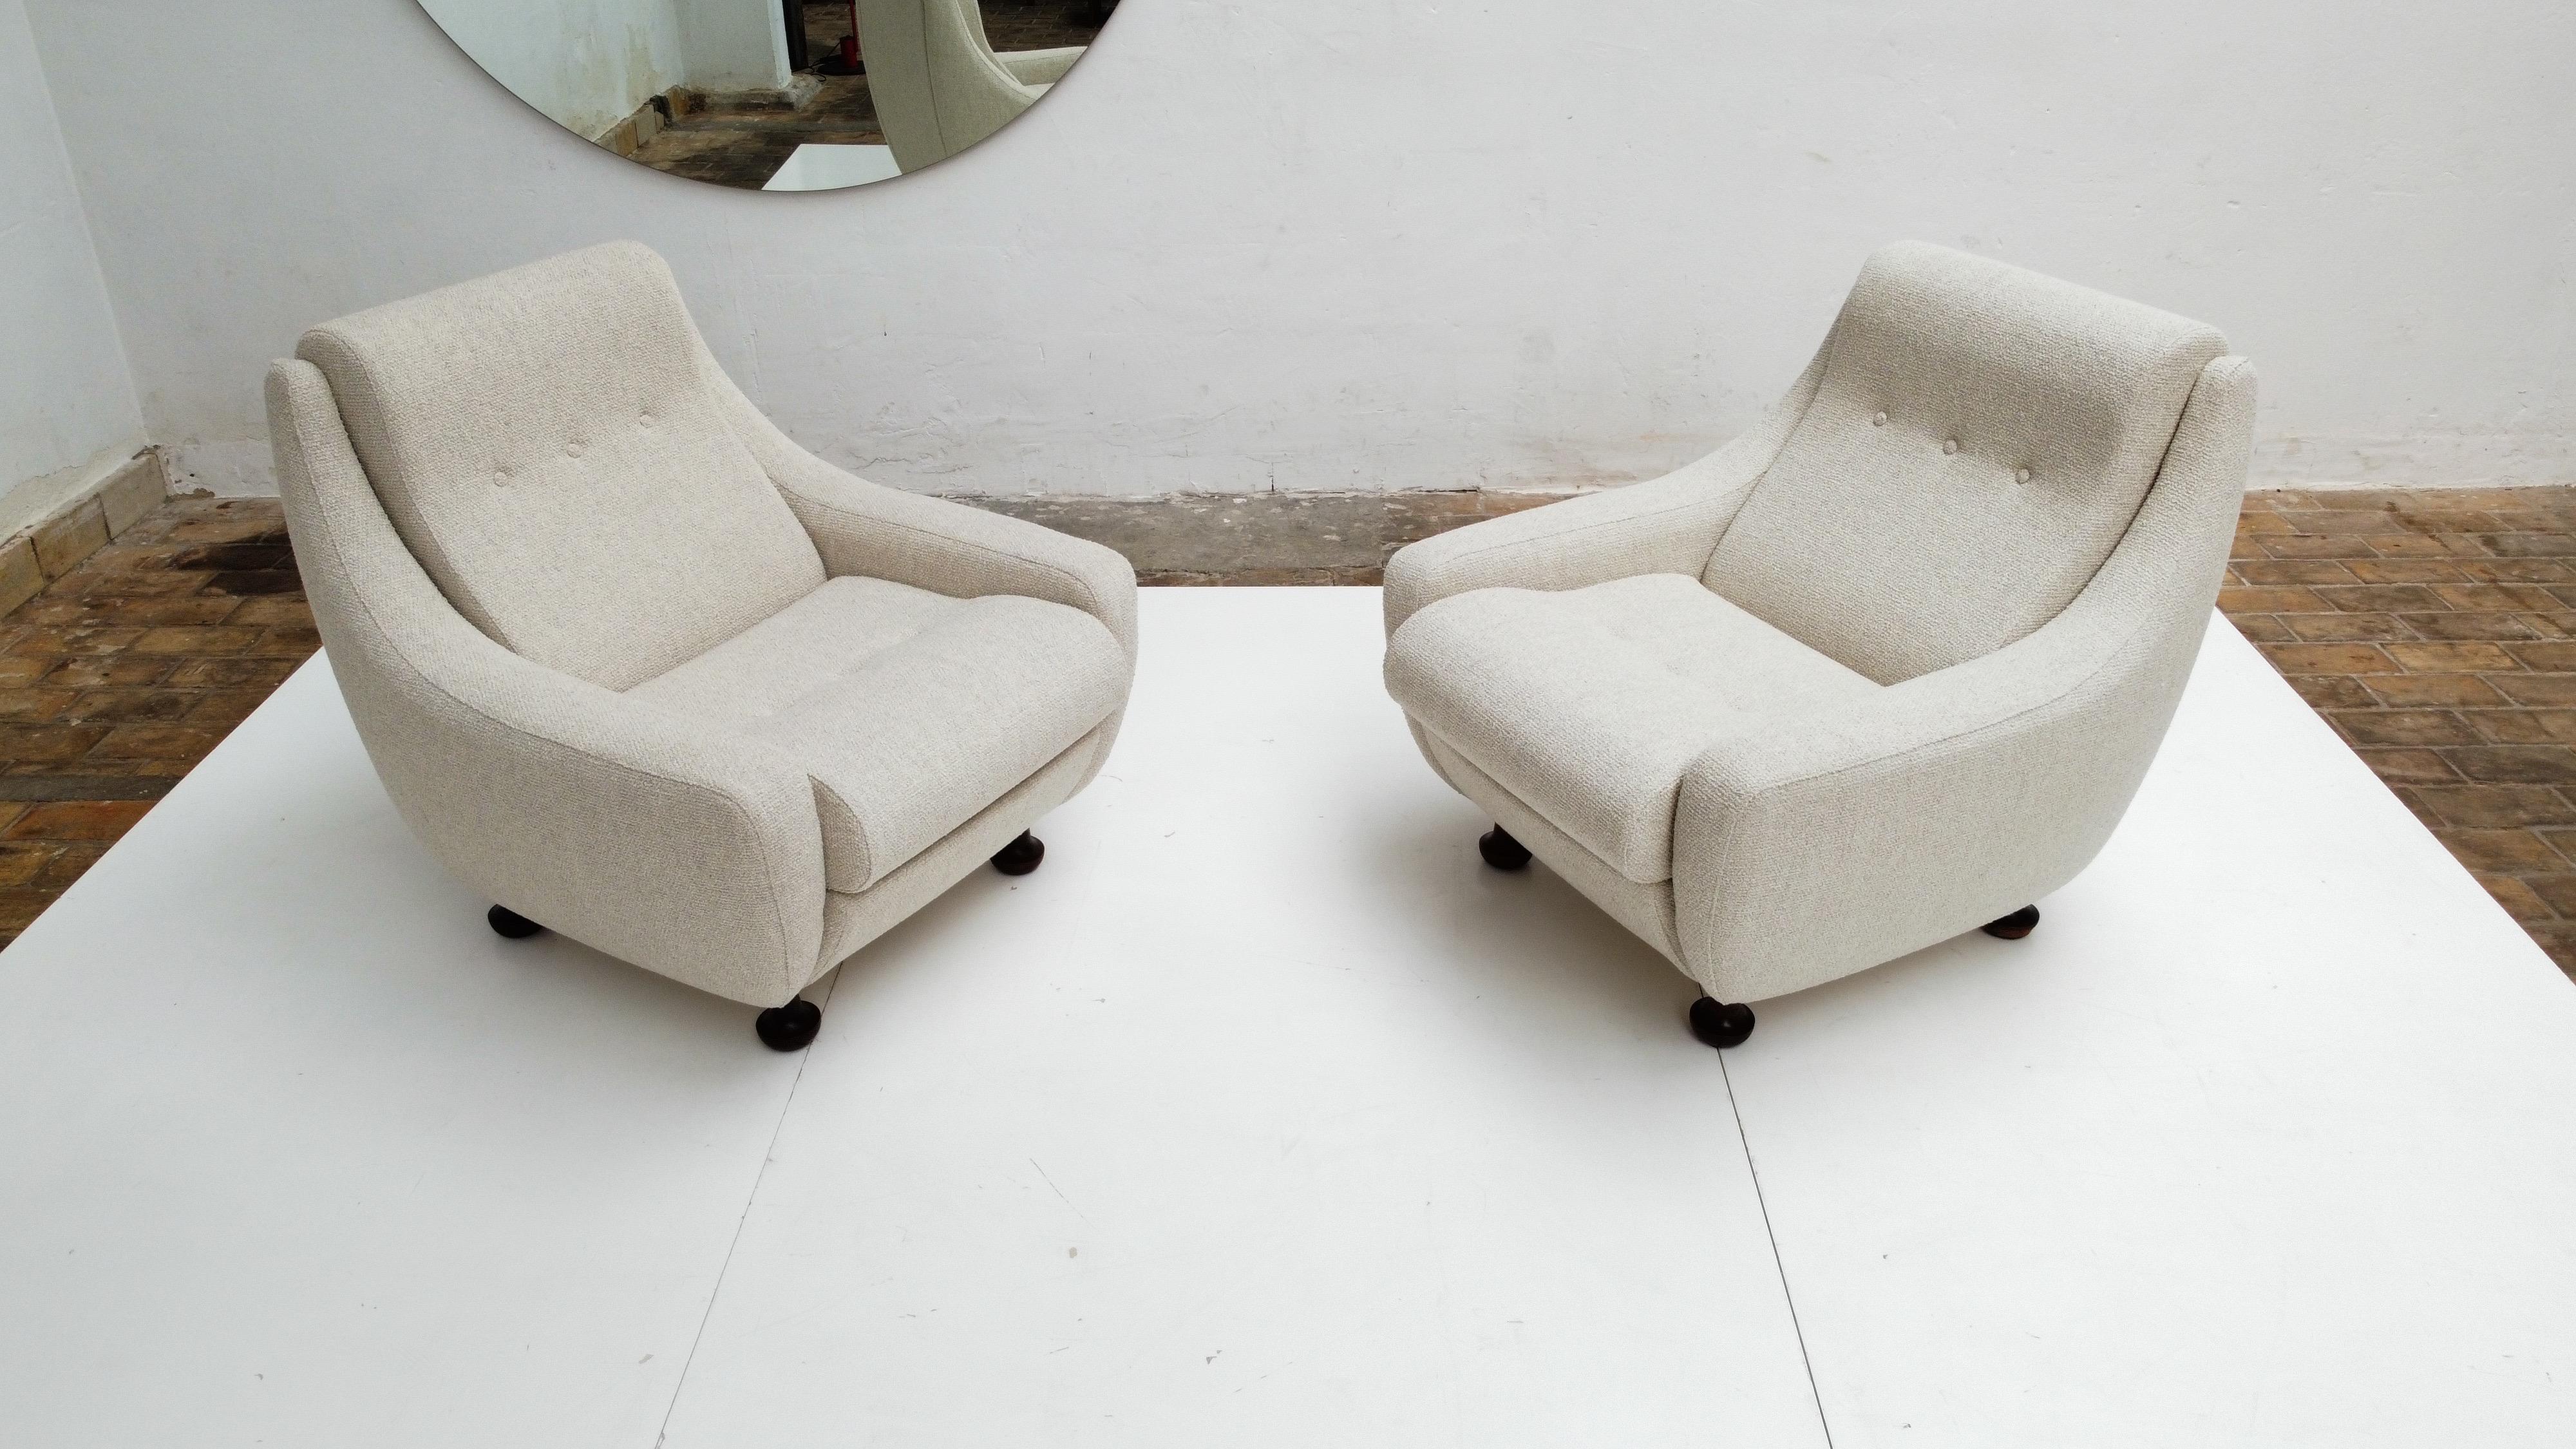 Metal Pair of Rare 60's Organic Curved Lounge Chairs by Airborne France New Upholstery For Sale